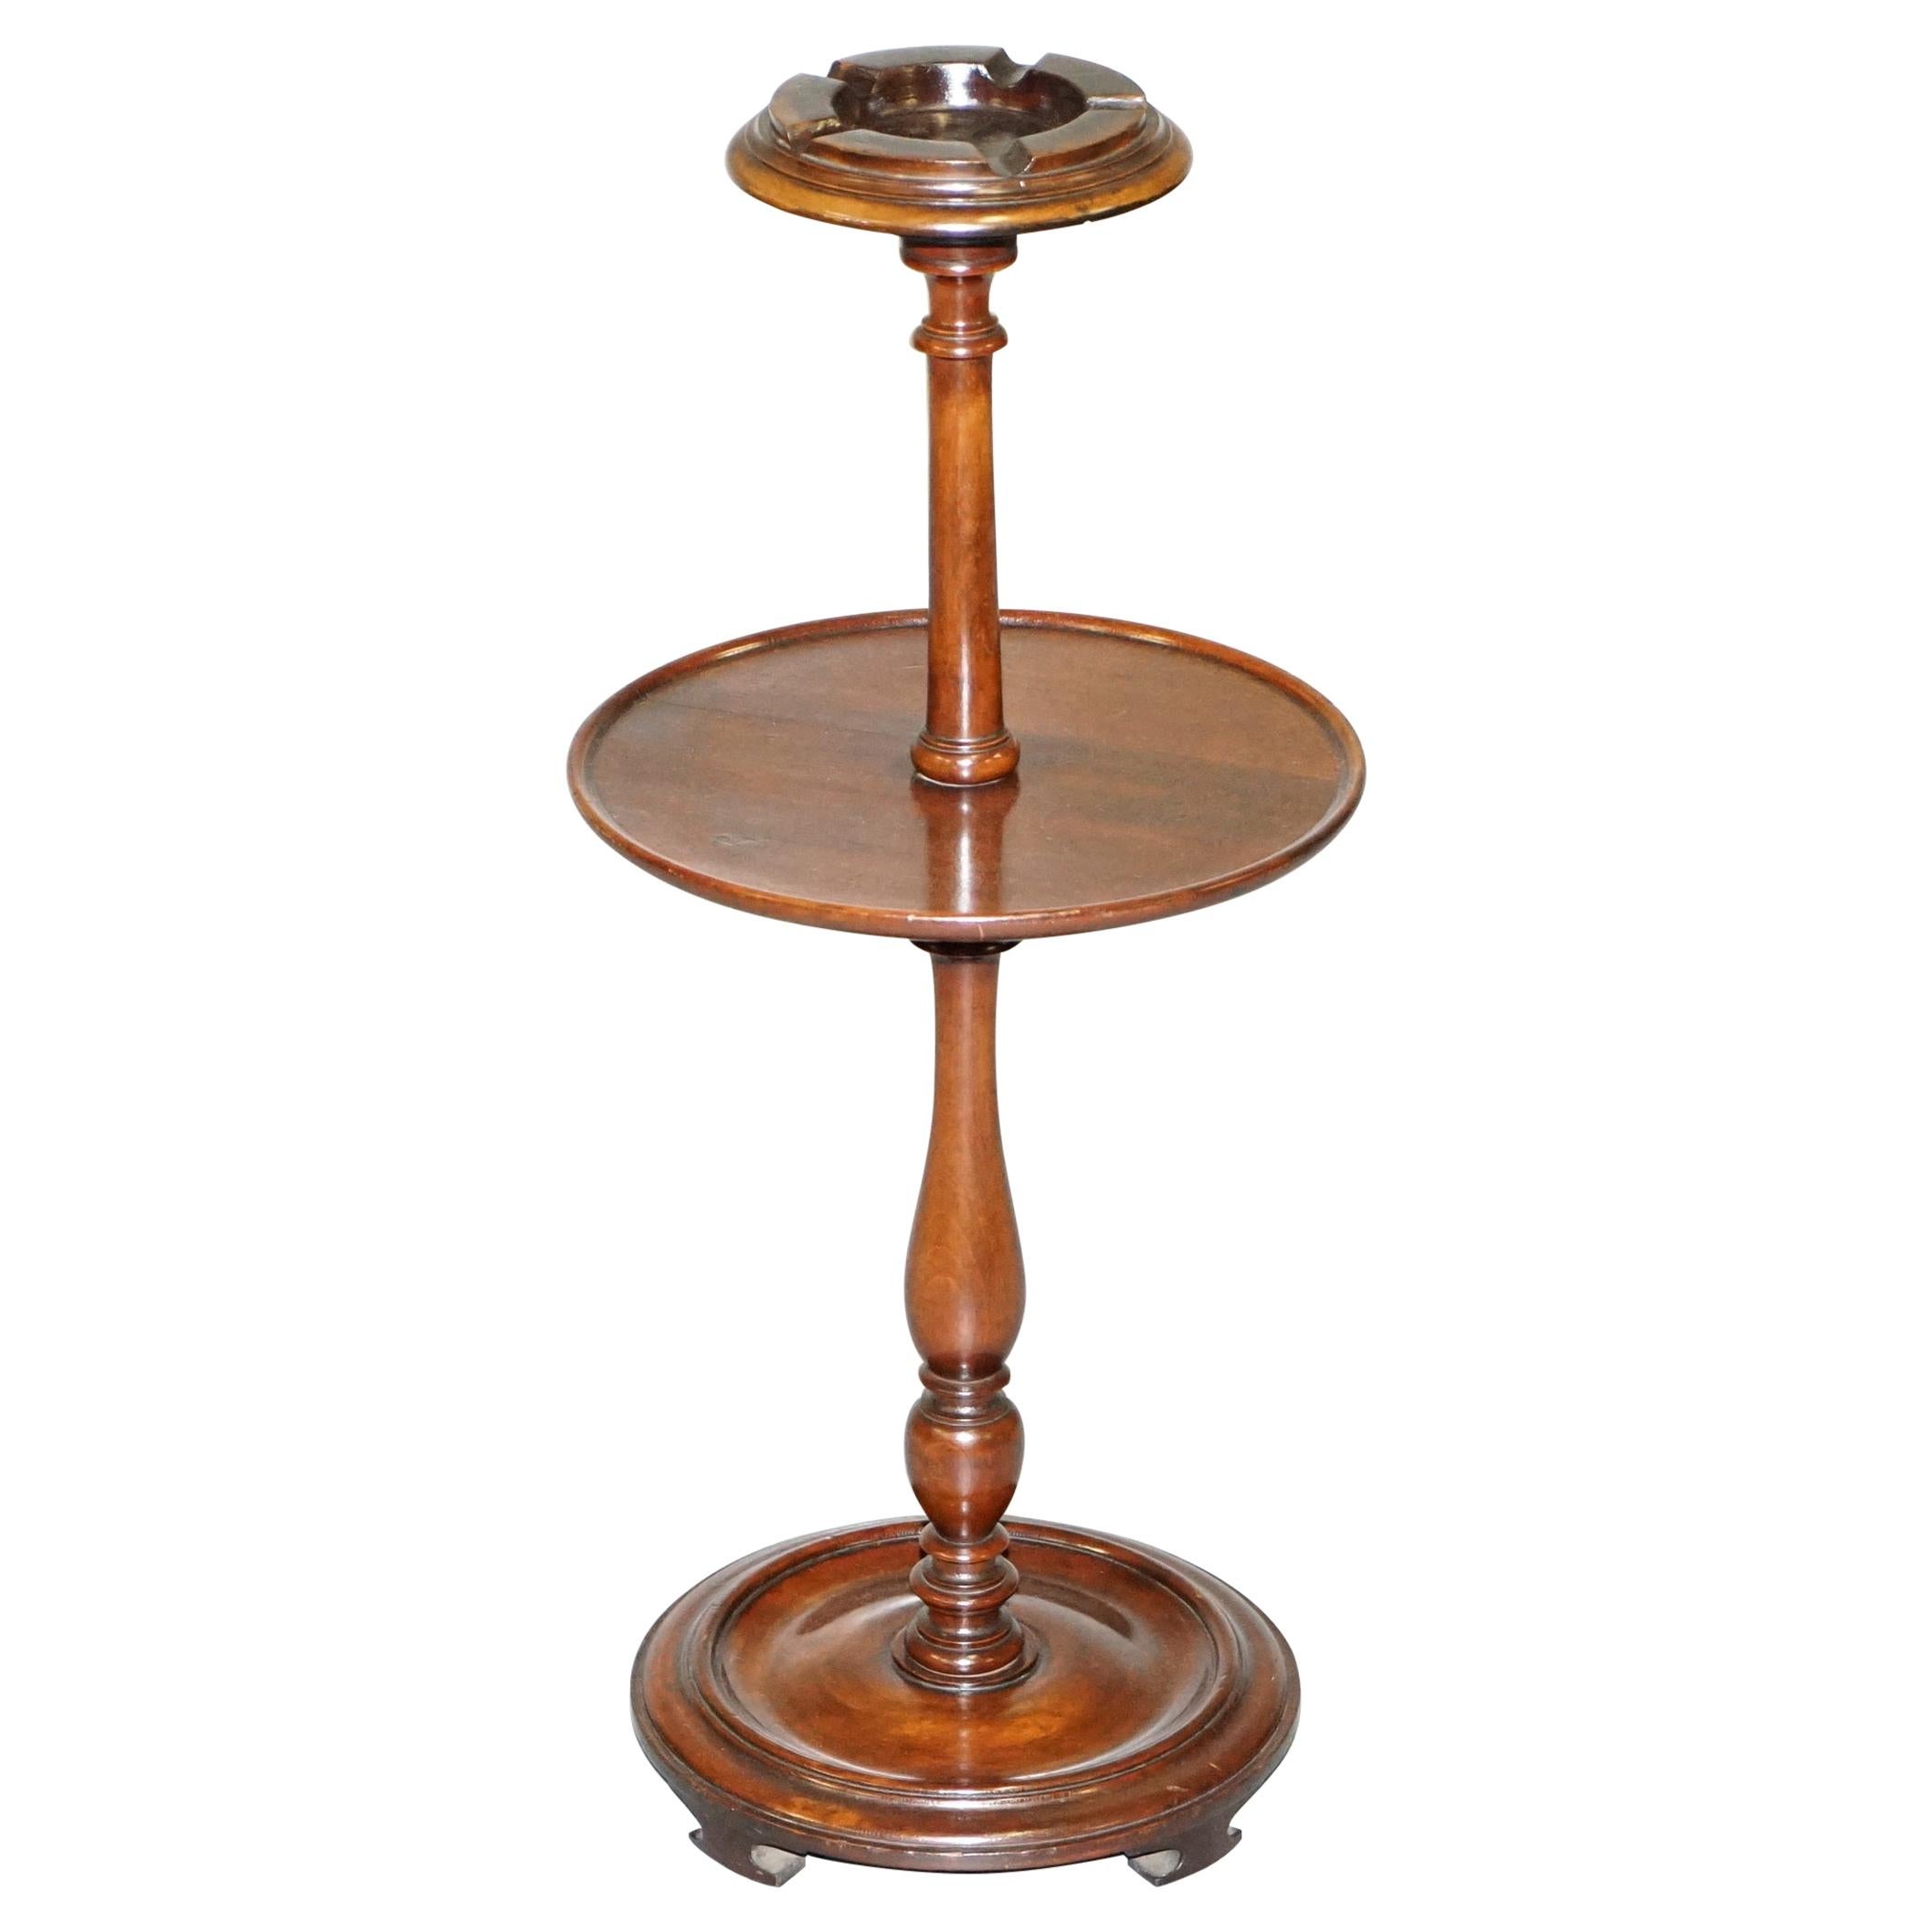 Stylish Art Deco Mahogany Two Tiered Smokers Side Table with Built in Ashtray